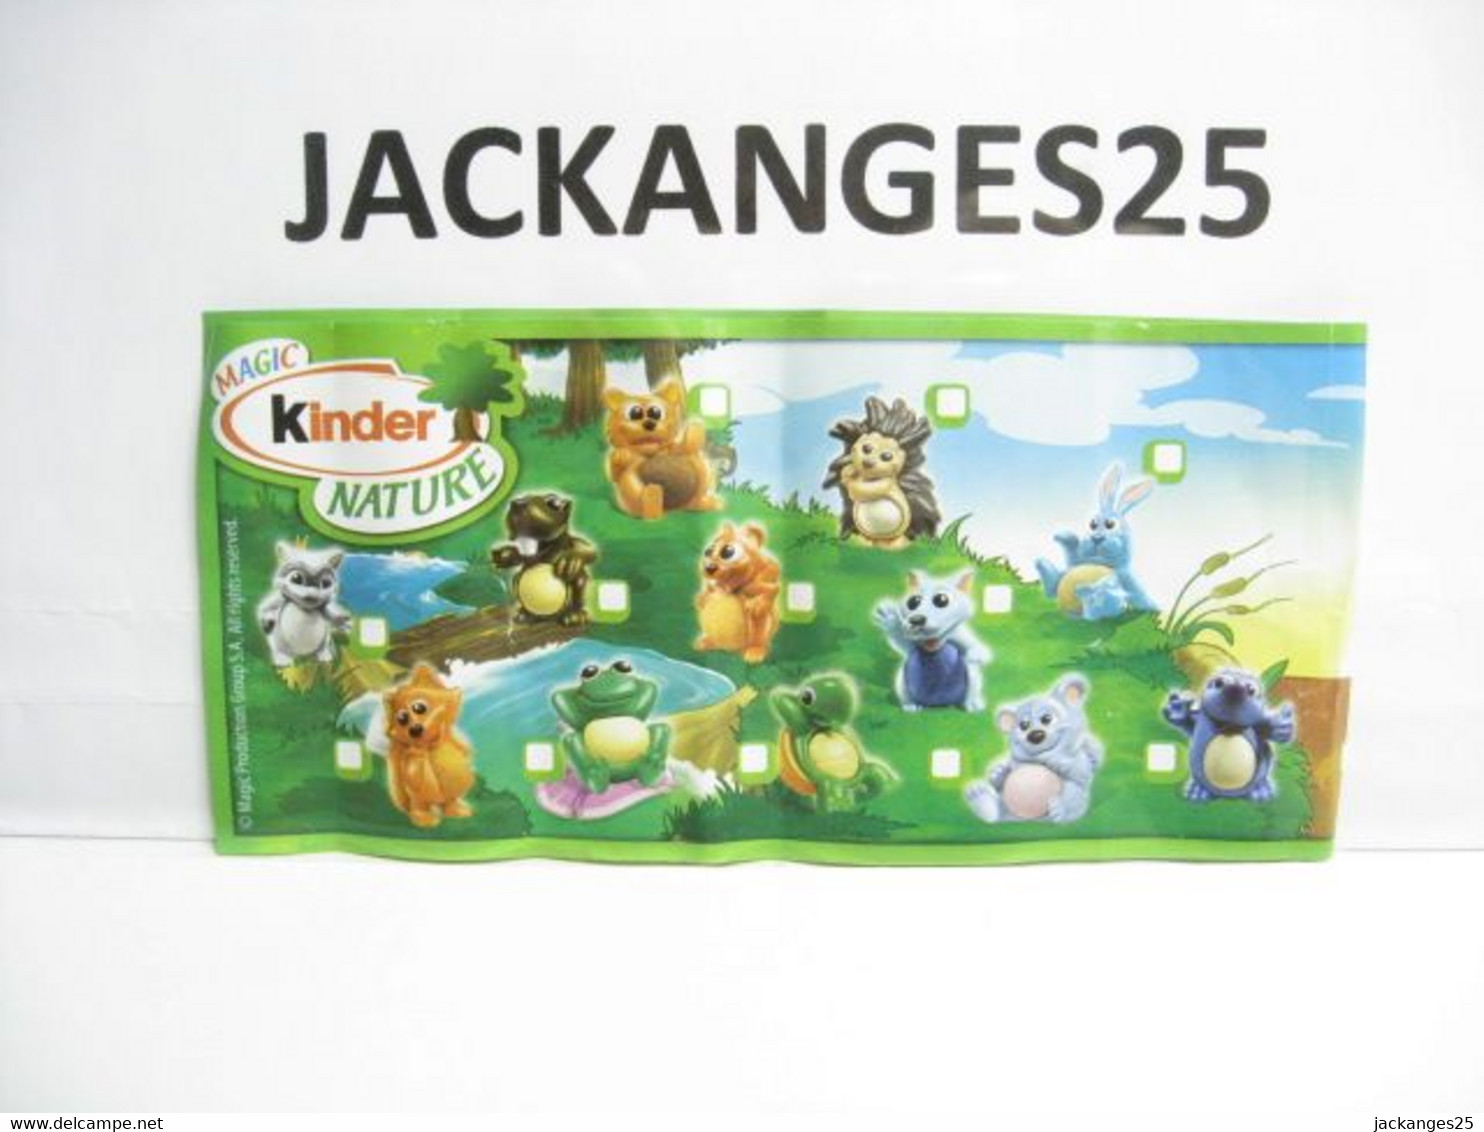 KINDER MPG UN 20 B TORTUE ANIMAUX NATURE NATOONS TIERE 2010  2011 + BPZ B NATURE - Familles